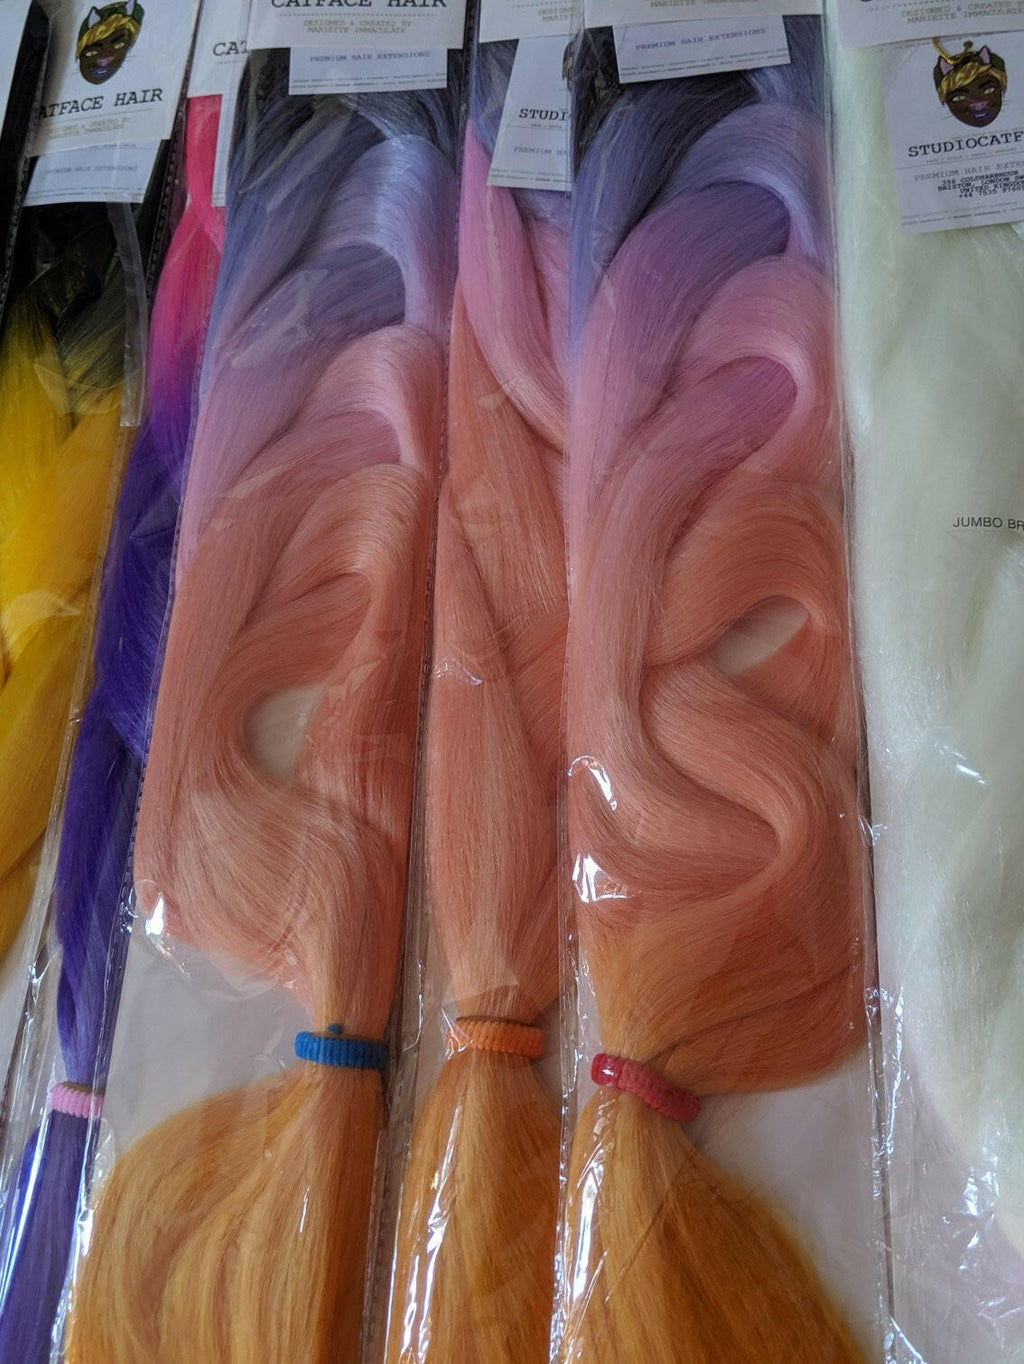 CATFACE HAIR COSMIC CANDY CRUSH OMBRE - FOUR TONE OMBE JUMBO BRAIDING HAIR  30 INCHES.